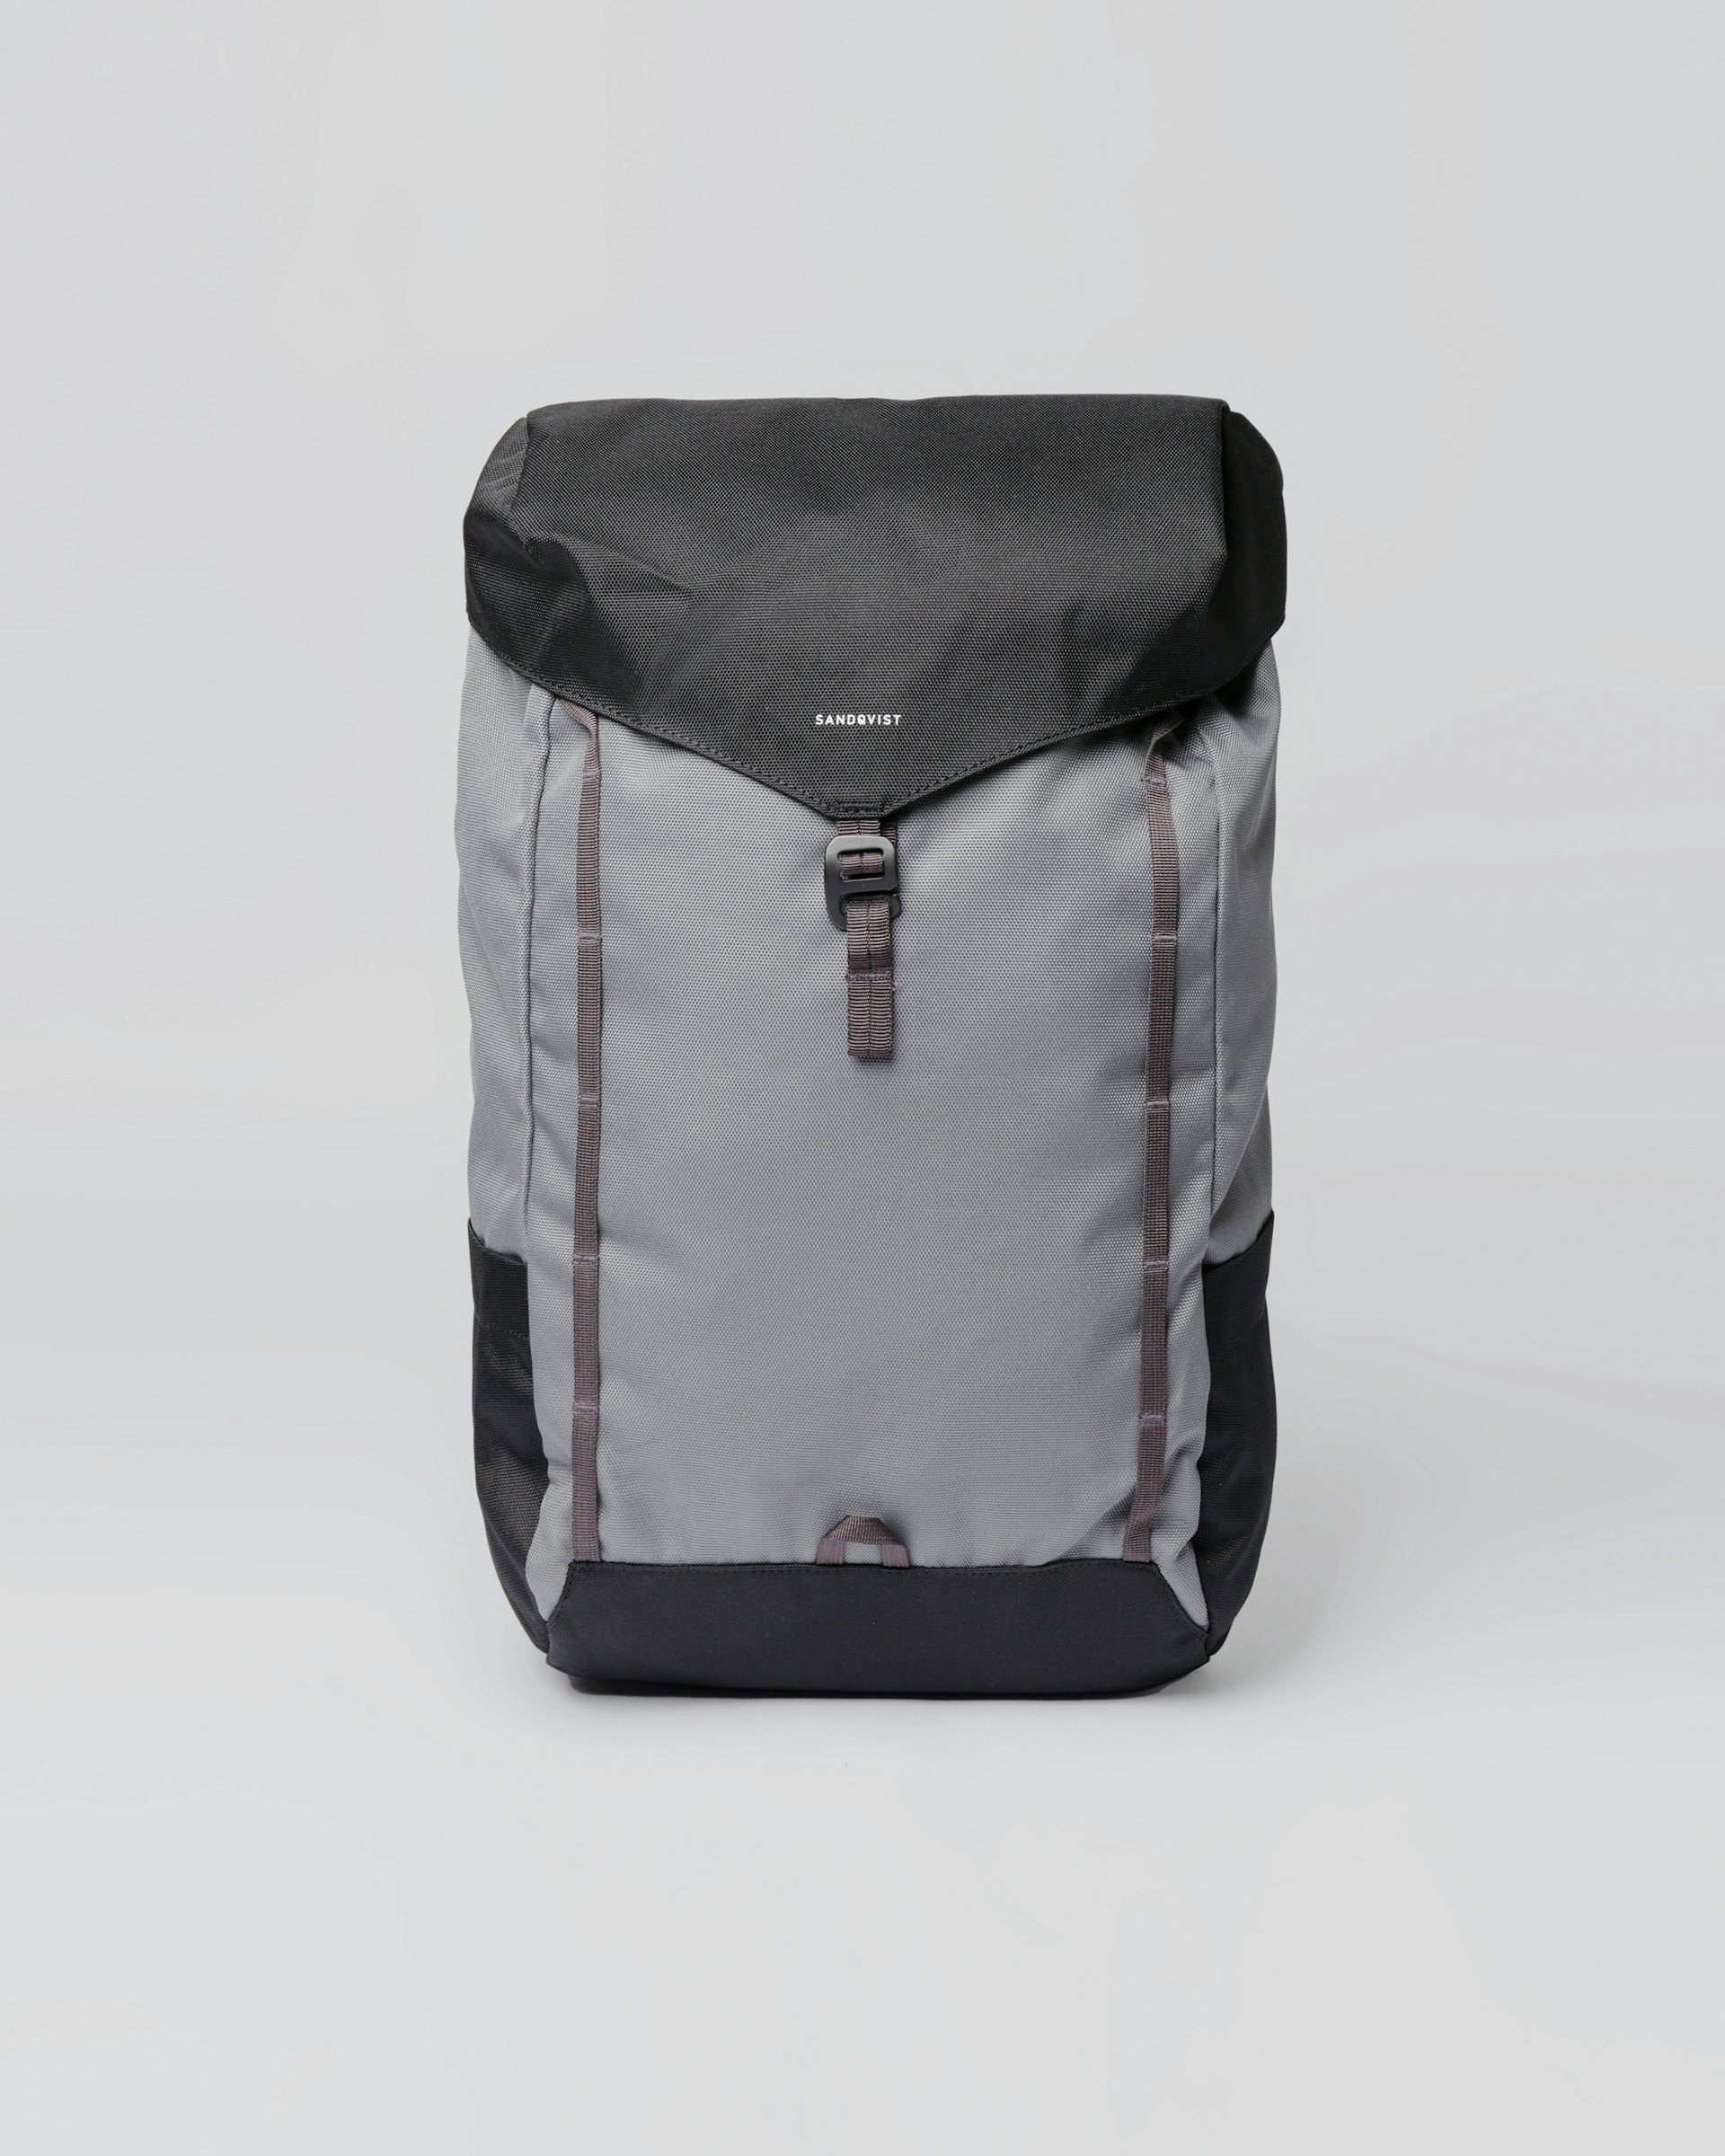 Walter belongs to the category Backpacks and is in color night grey